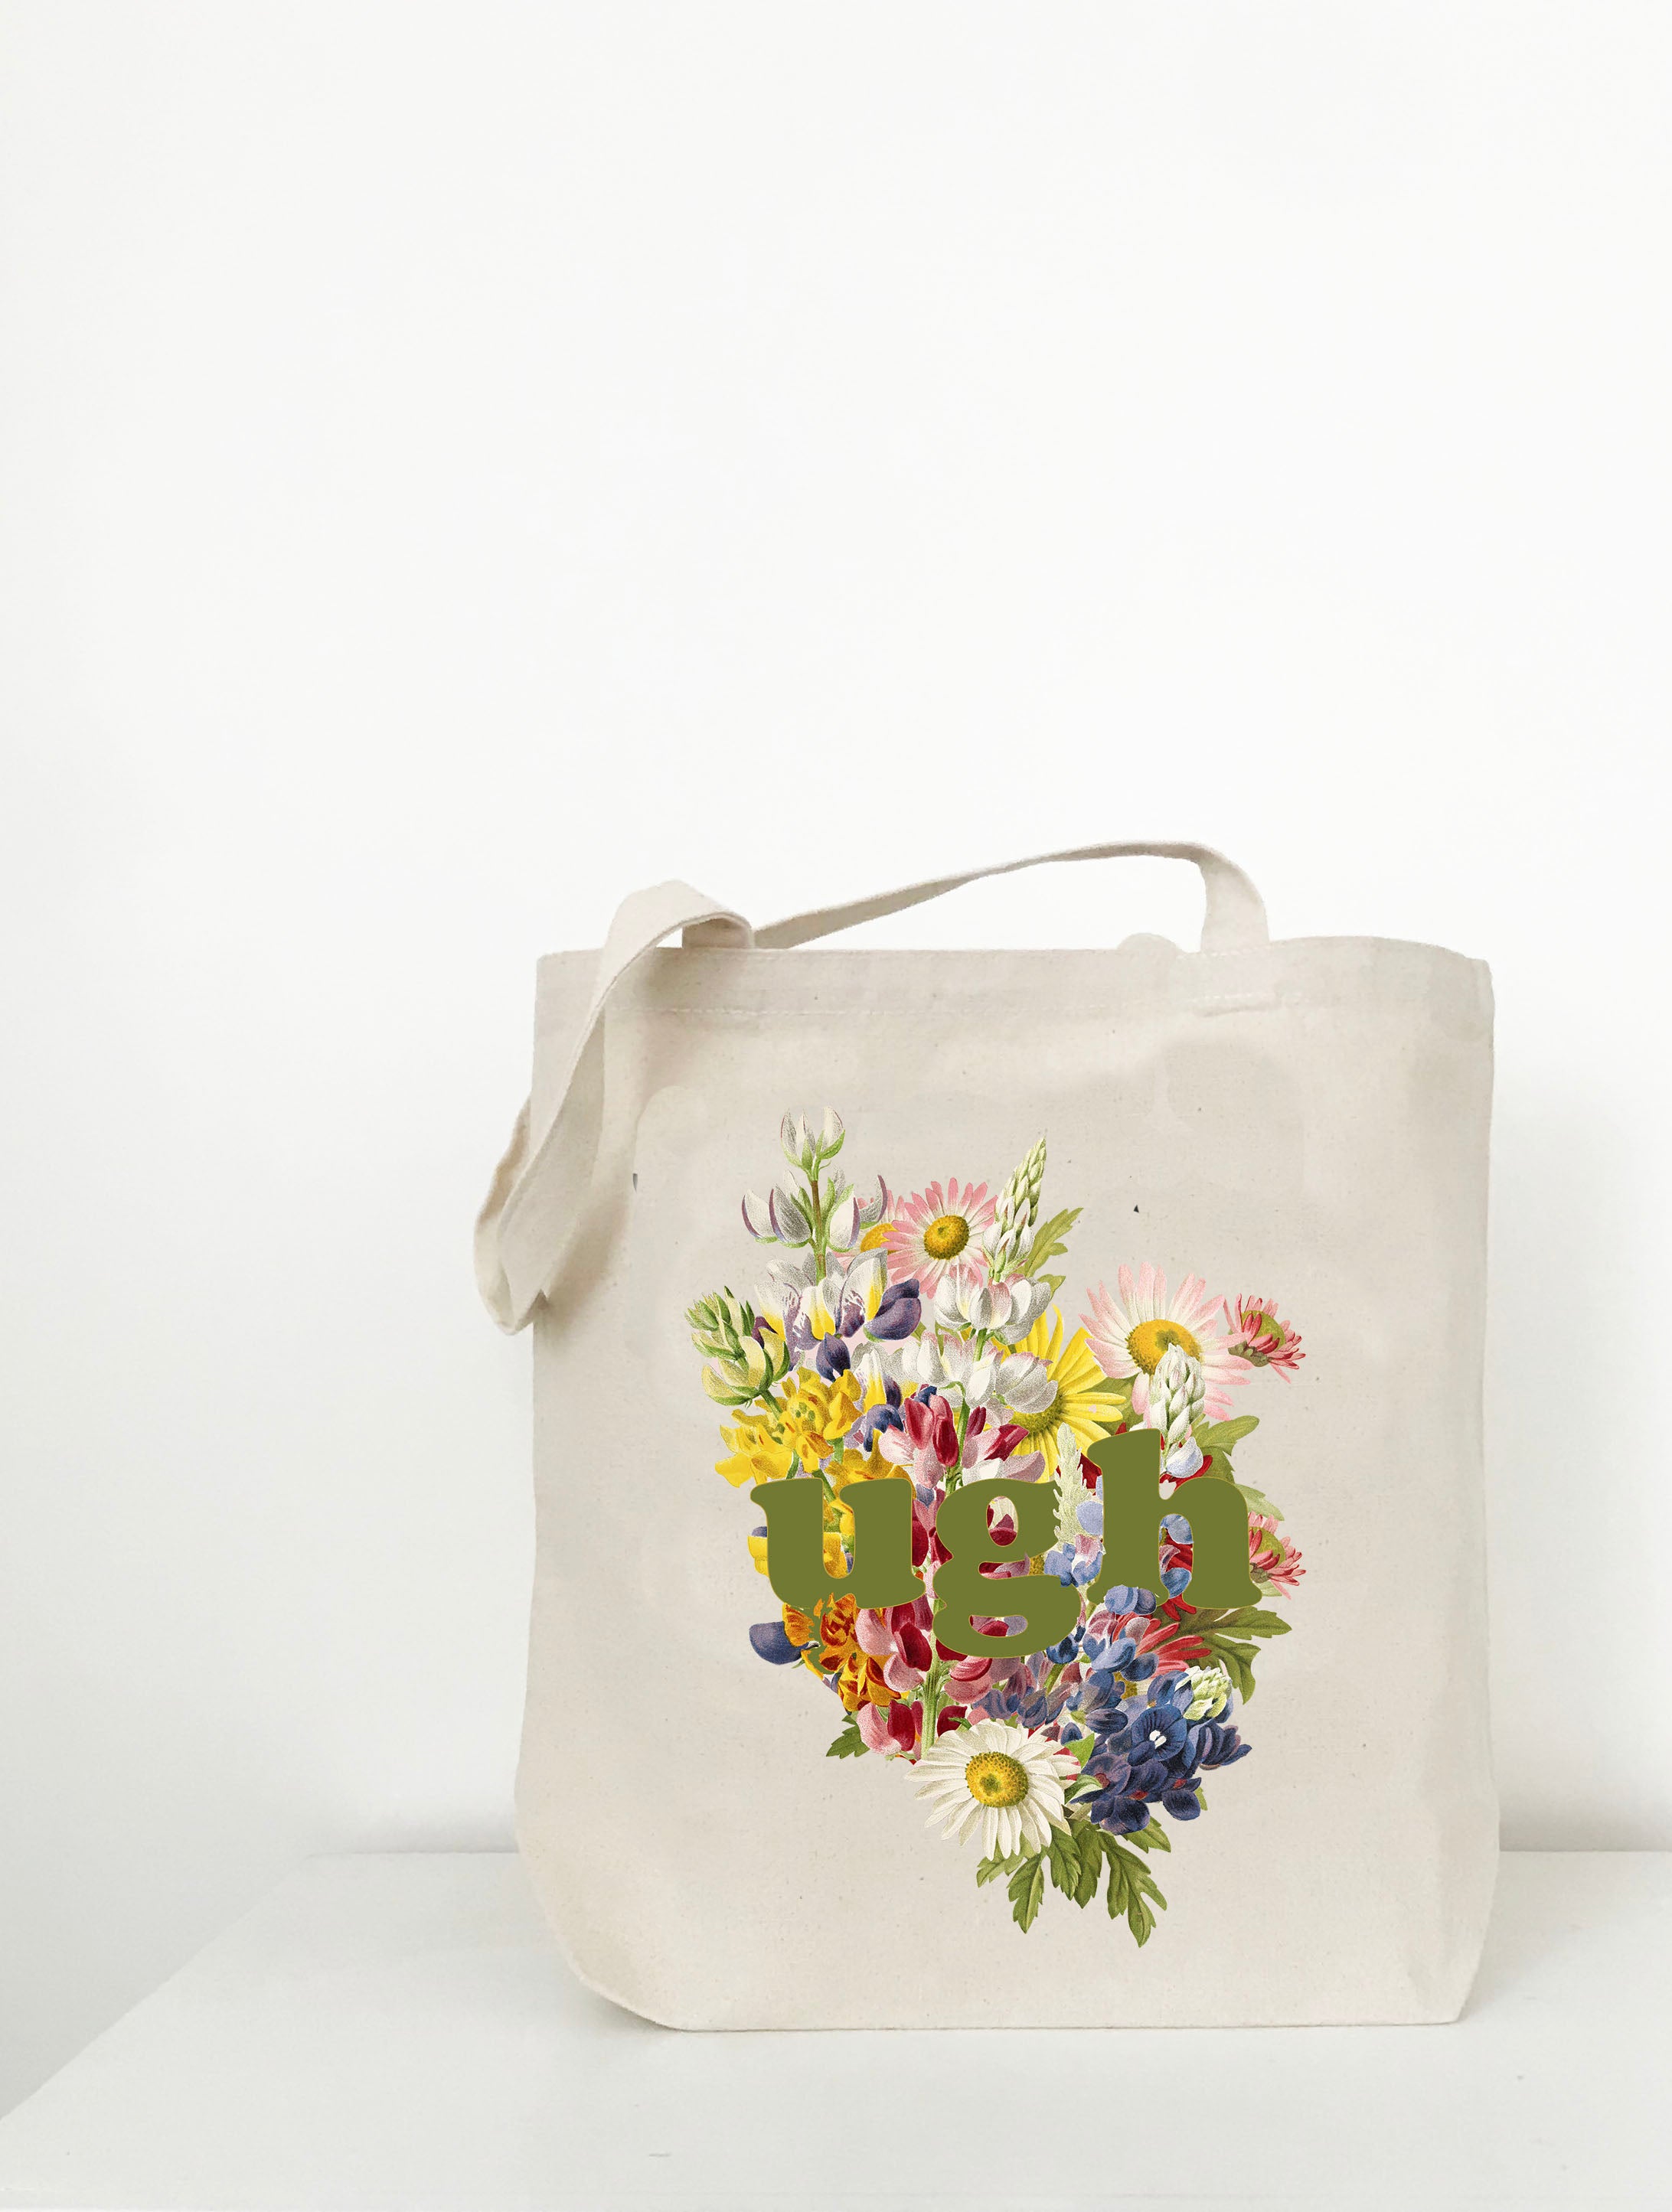 Rainbow Recycled Cotton Grocery Tote Bag | Totally Promotional